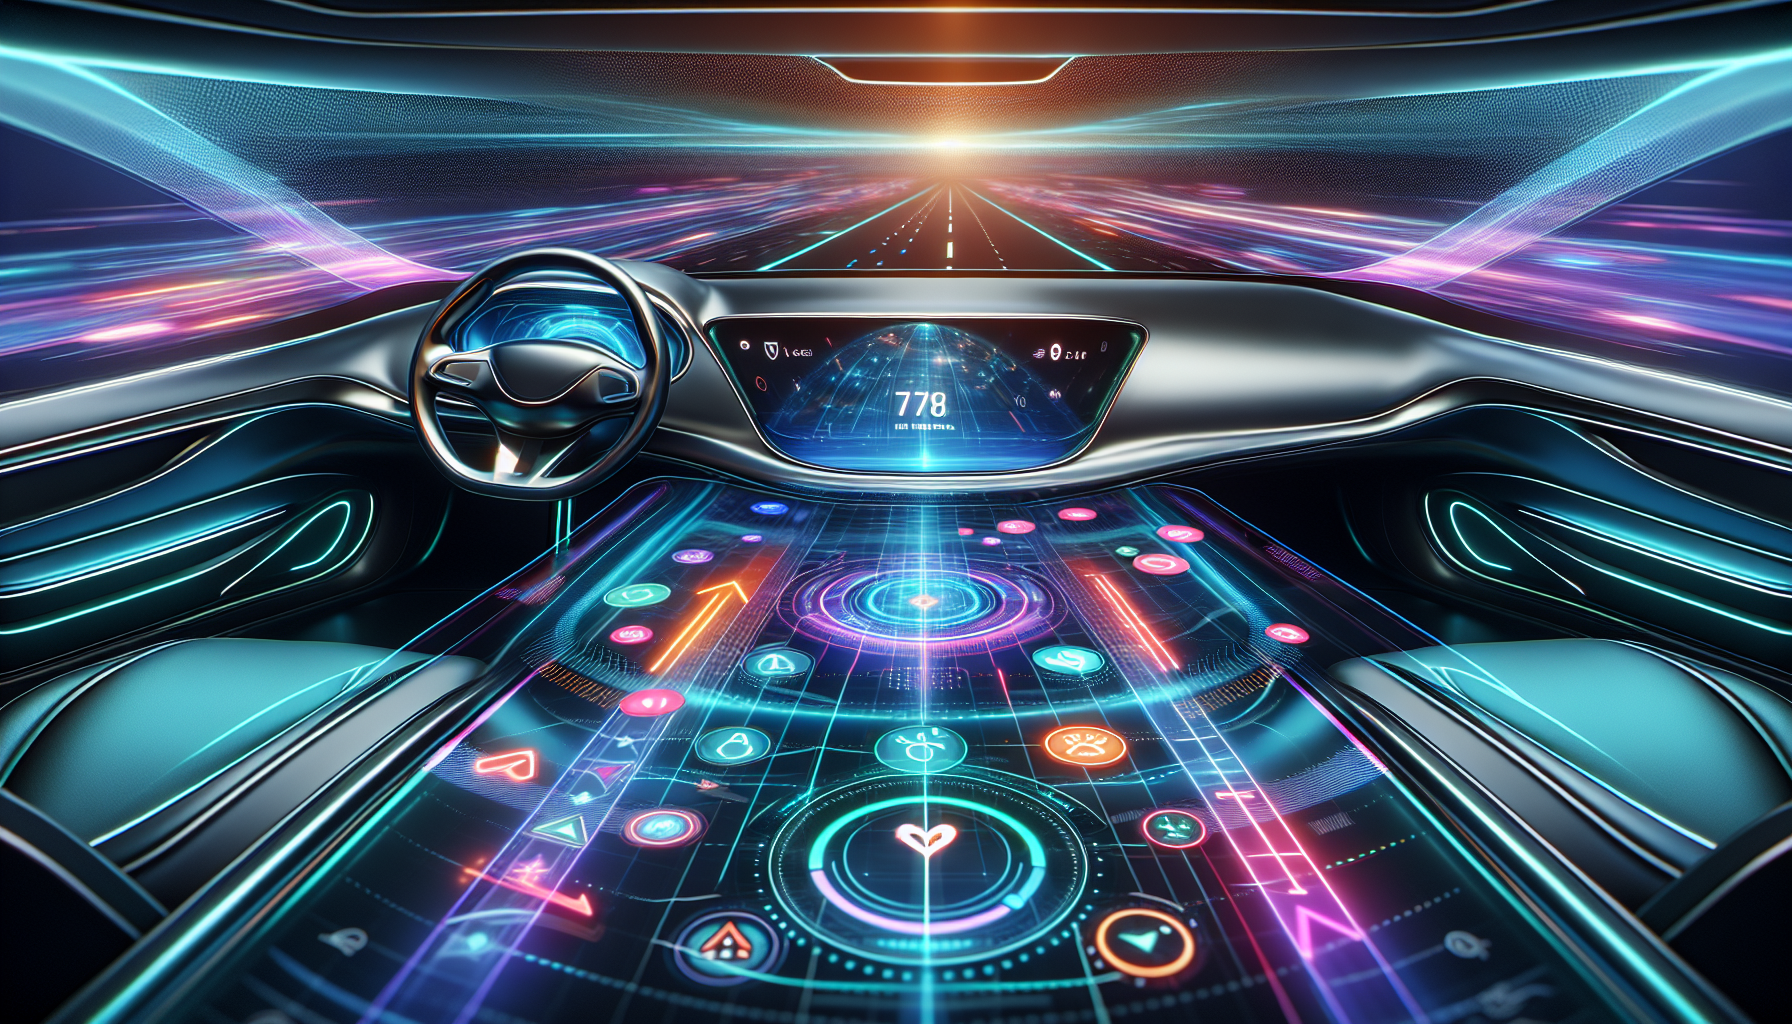 A futuristic car interior with a holographic augmented reality display projected on the windshield, showcasing navigation, speed, and nearby points of interest.